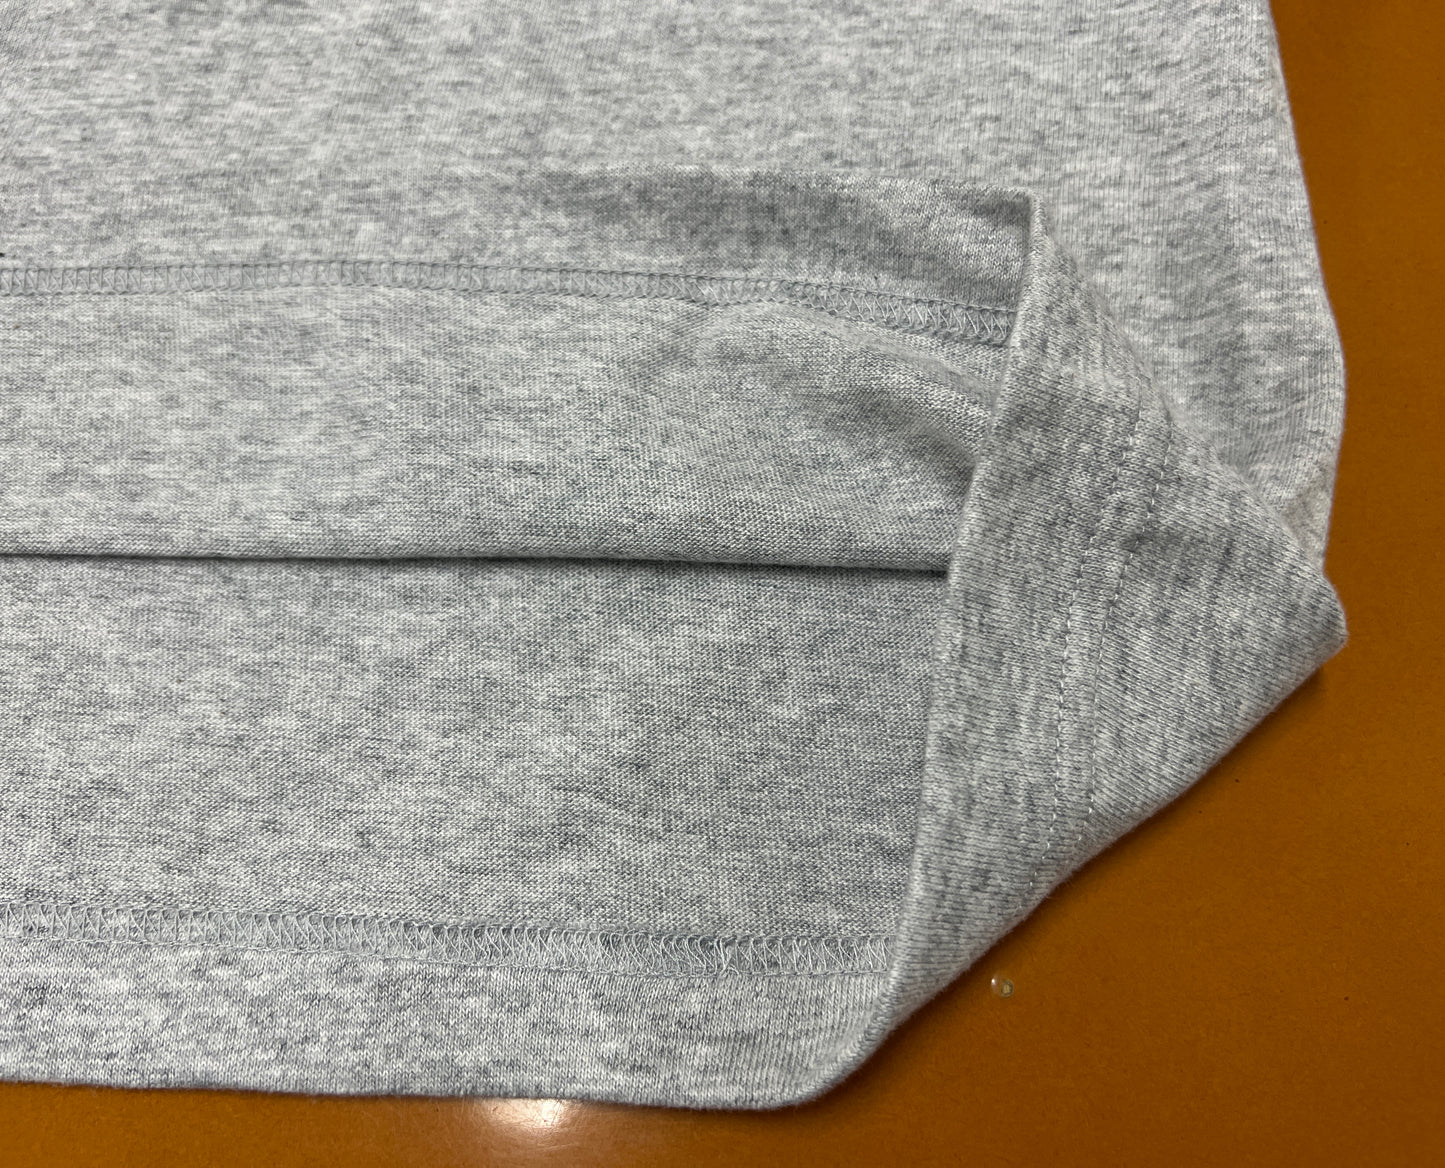 【GRAY】”Catch The Wave”Tee